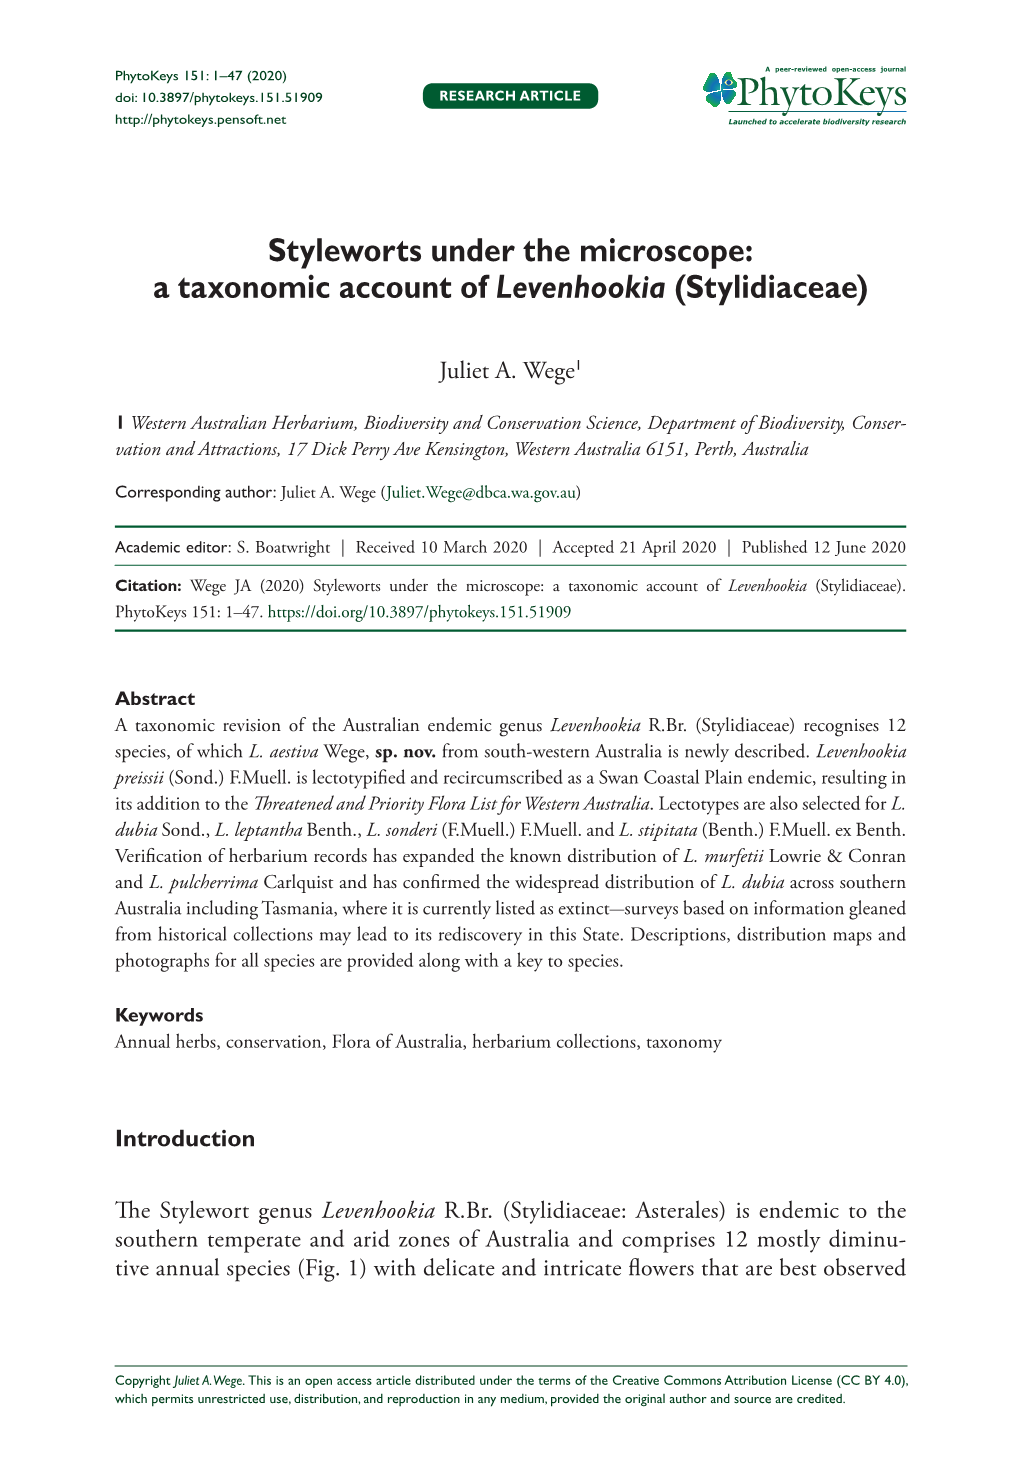 A Taxonomic Account of Levenhookia (Stylidiaceae)